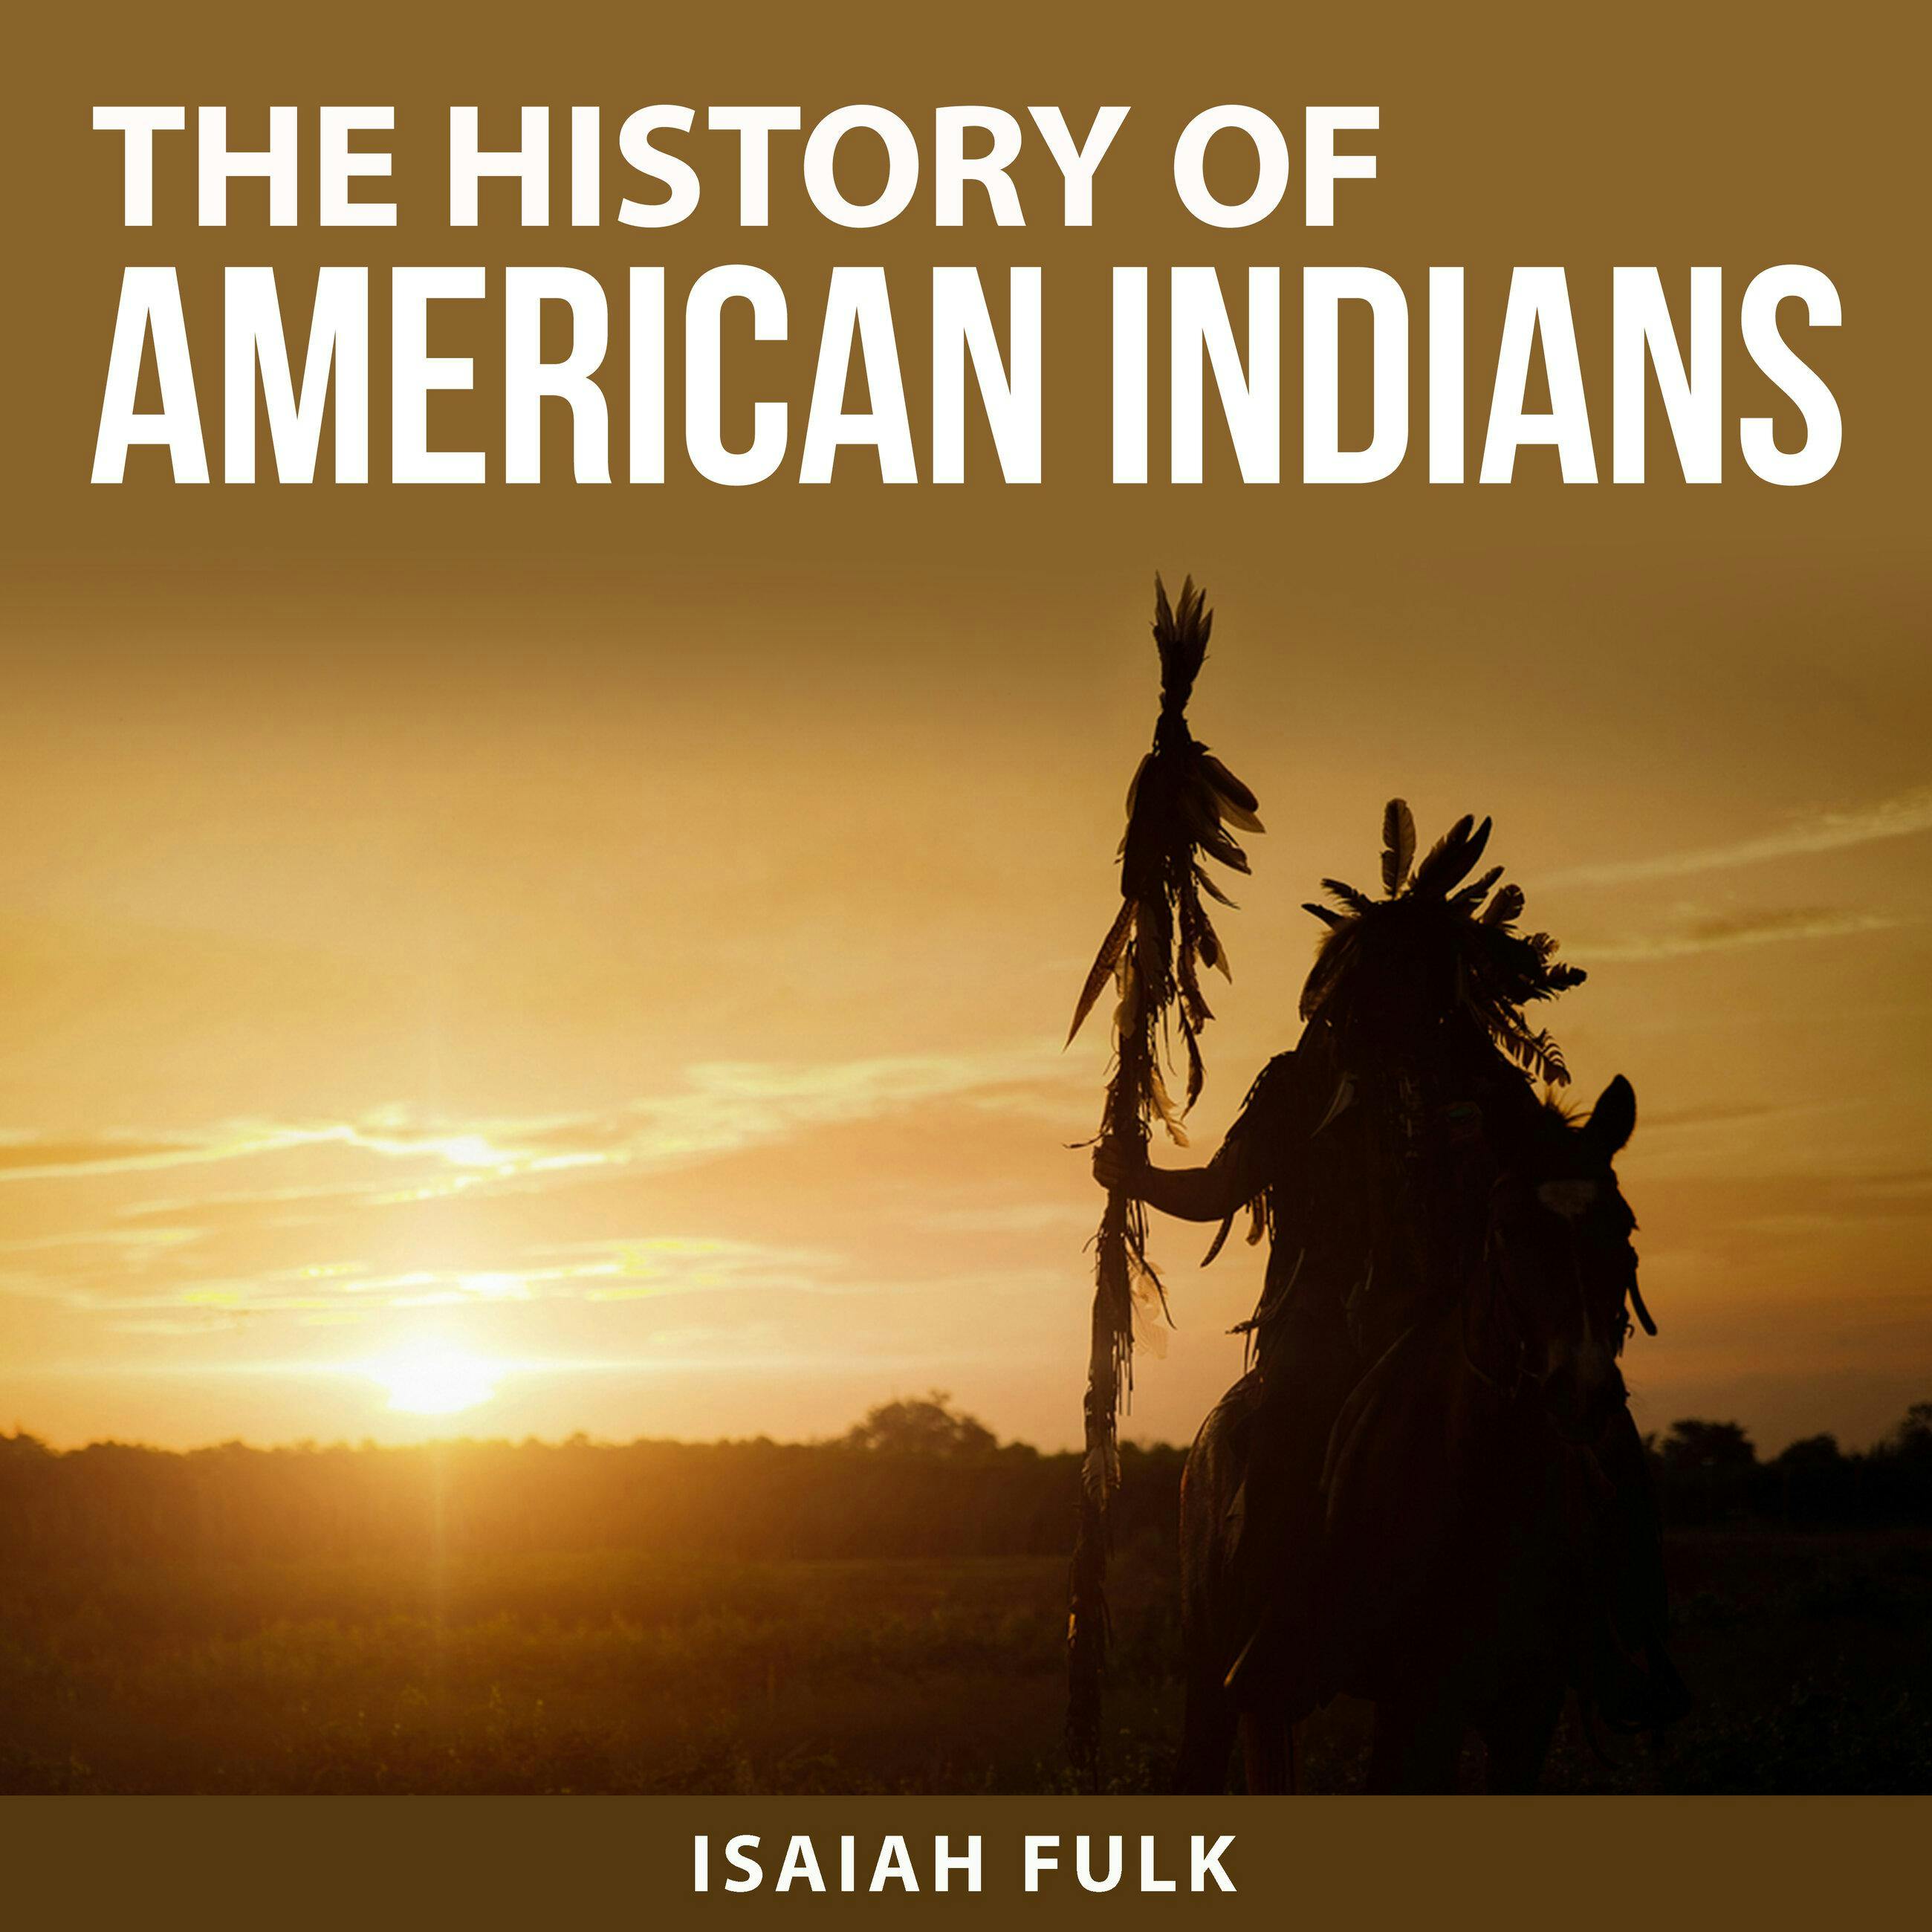 The History of American Indians - Isaiah Fulk